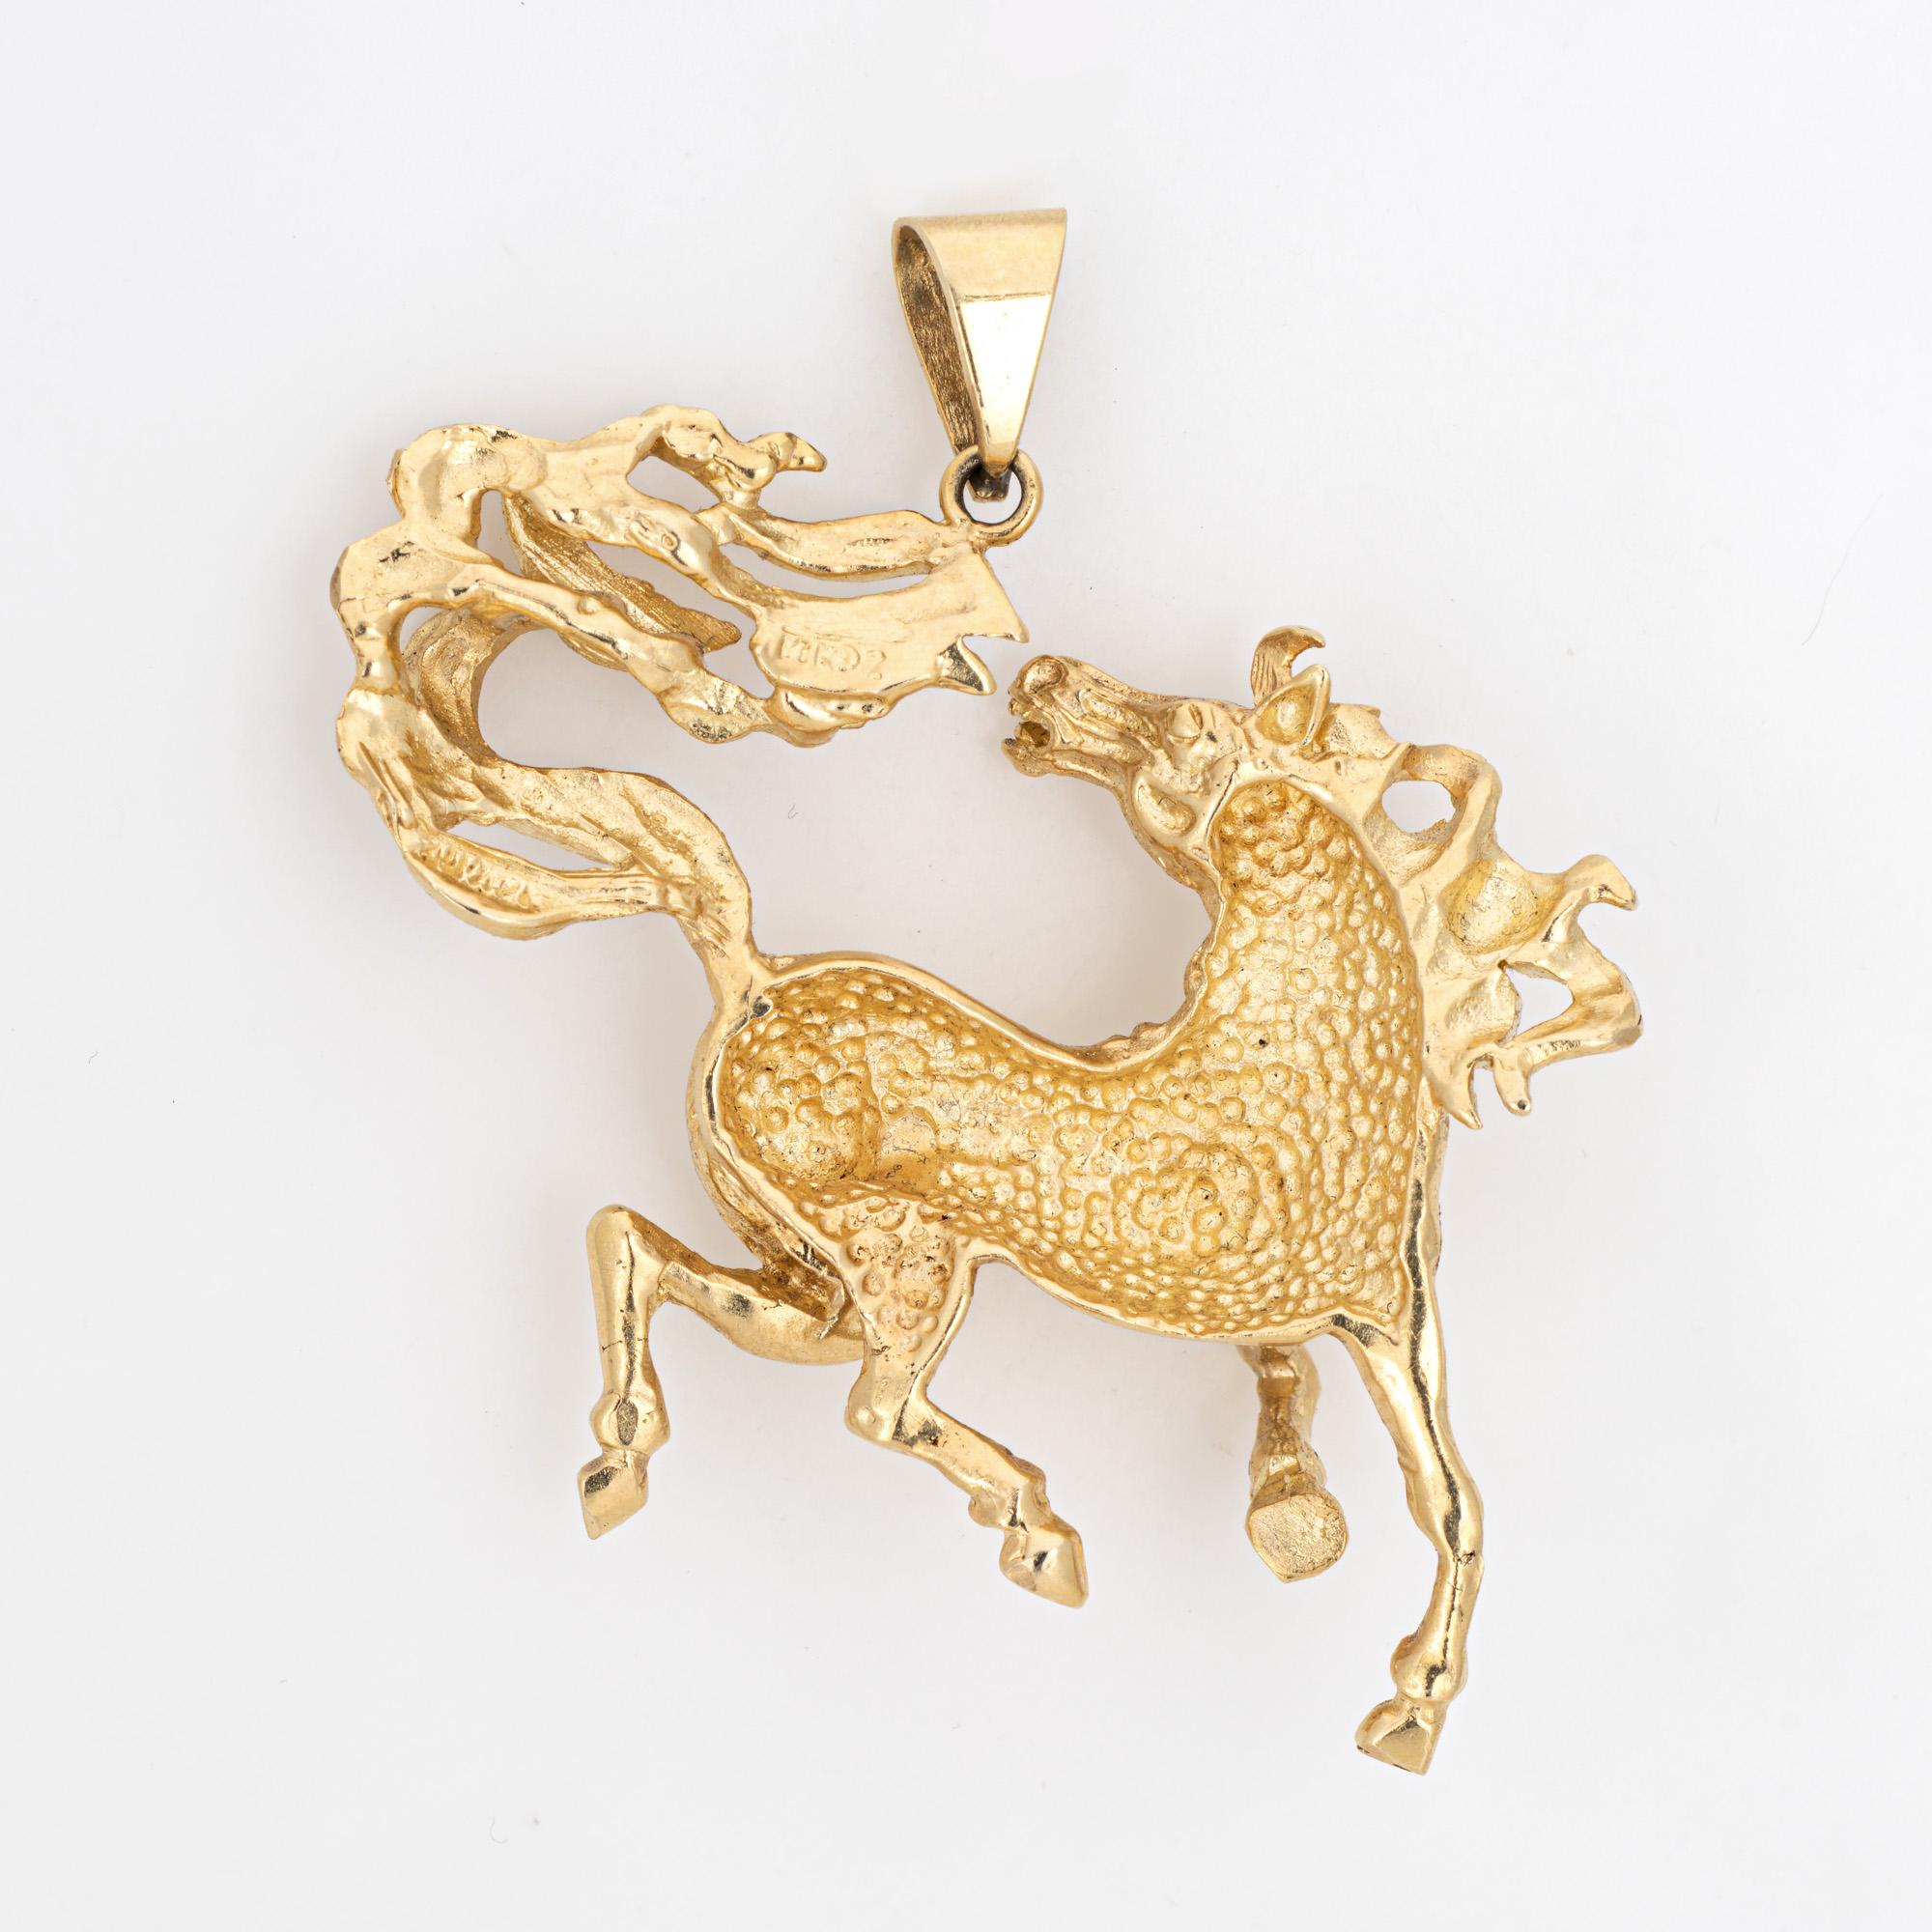 Wild Horse Pendant Vintage 14k Yellow Gold Large Animal Jewelry Fine Estate In Good Condition For Sale In Torrance, CA